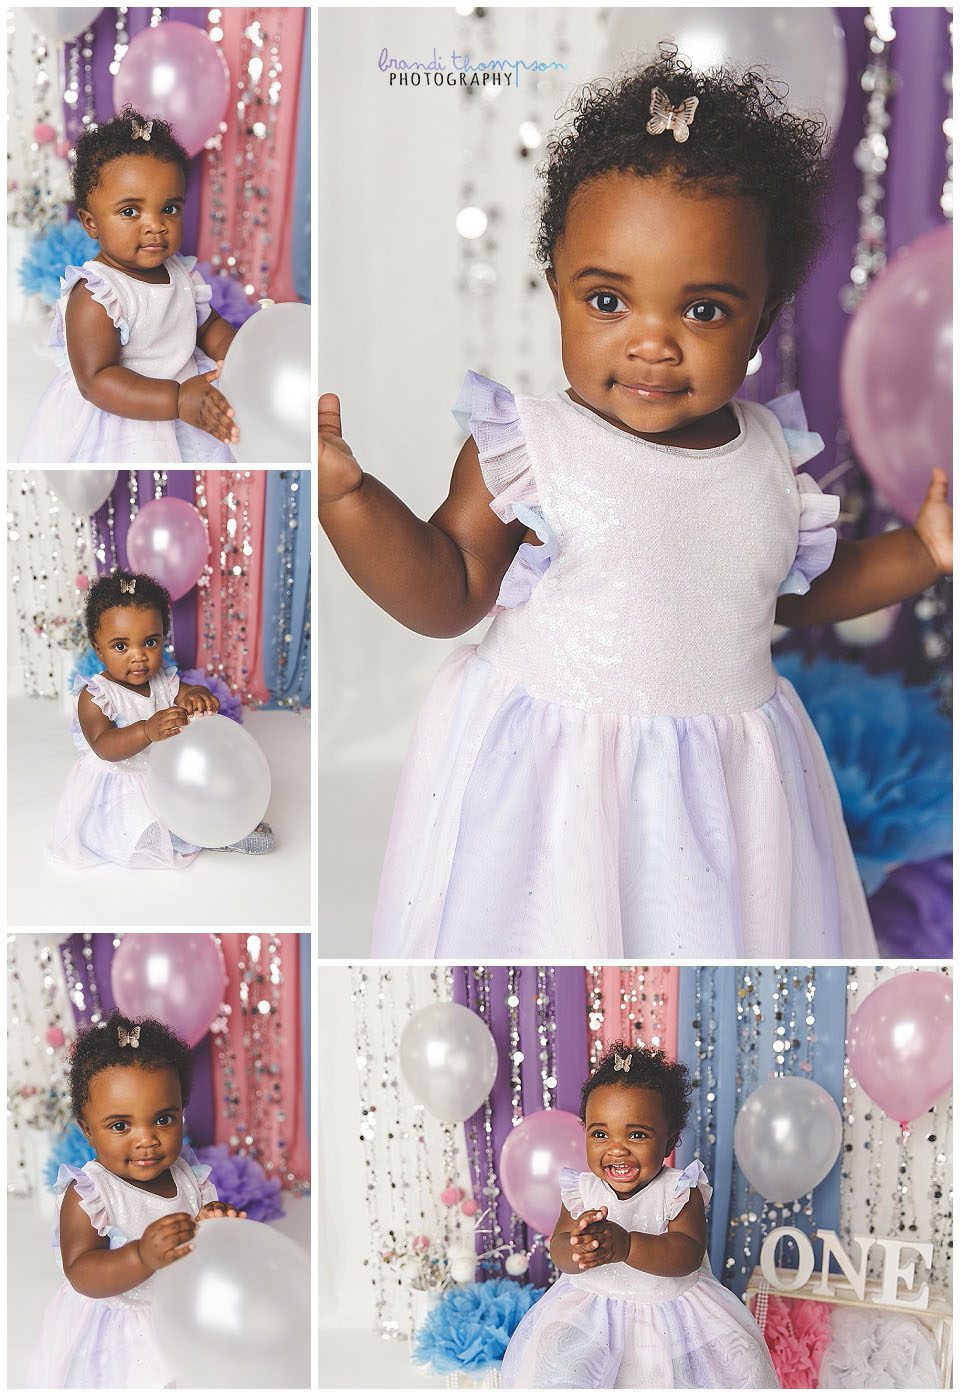 Black one year old baby girl with curly hair in a pastel dress with pink, blue, purple and white sparkly decor with cake smash session